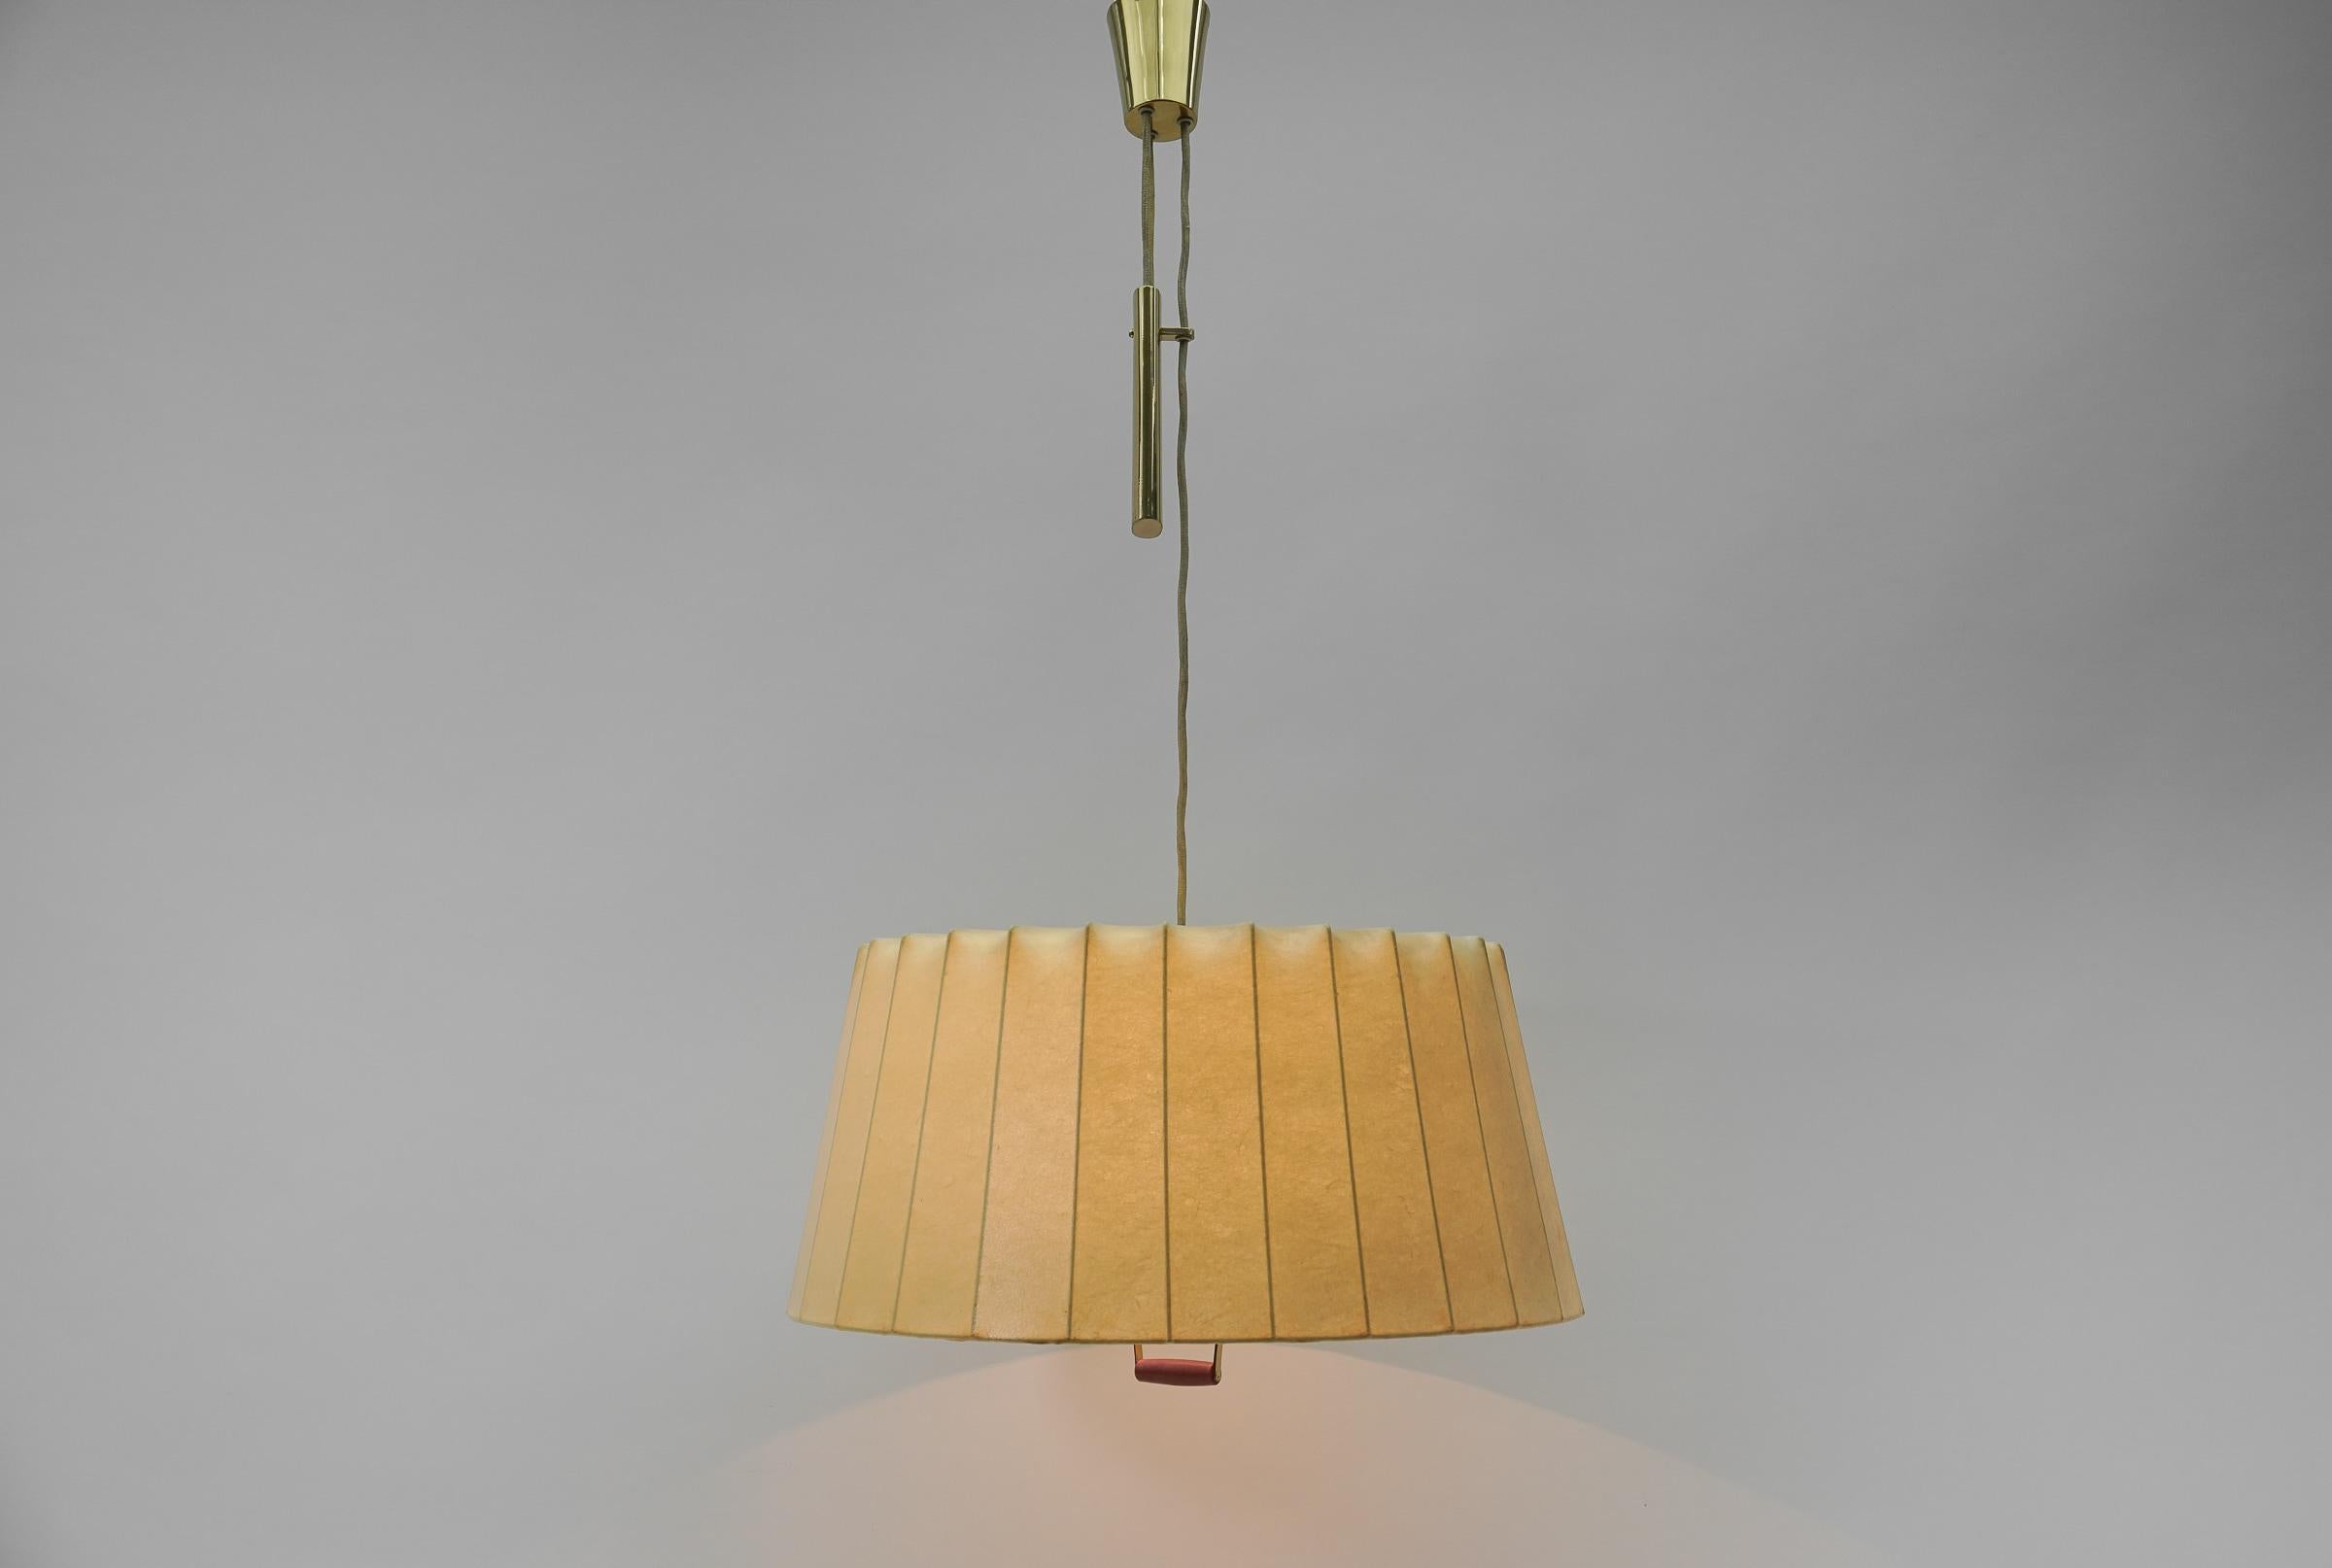 Lovely Cocoon Counterweight Hanging Lamp by Münchener Werkstätten, 1950s Germany For Sale 1